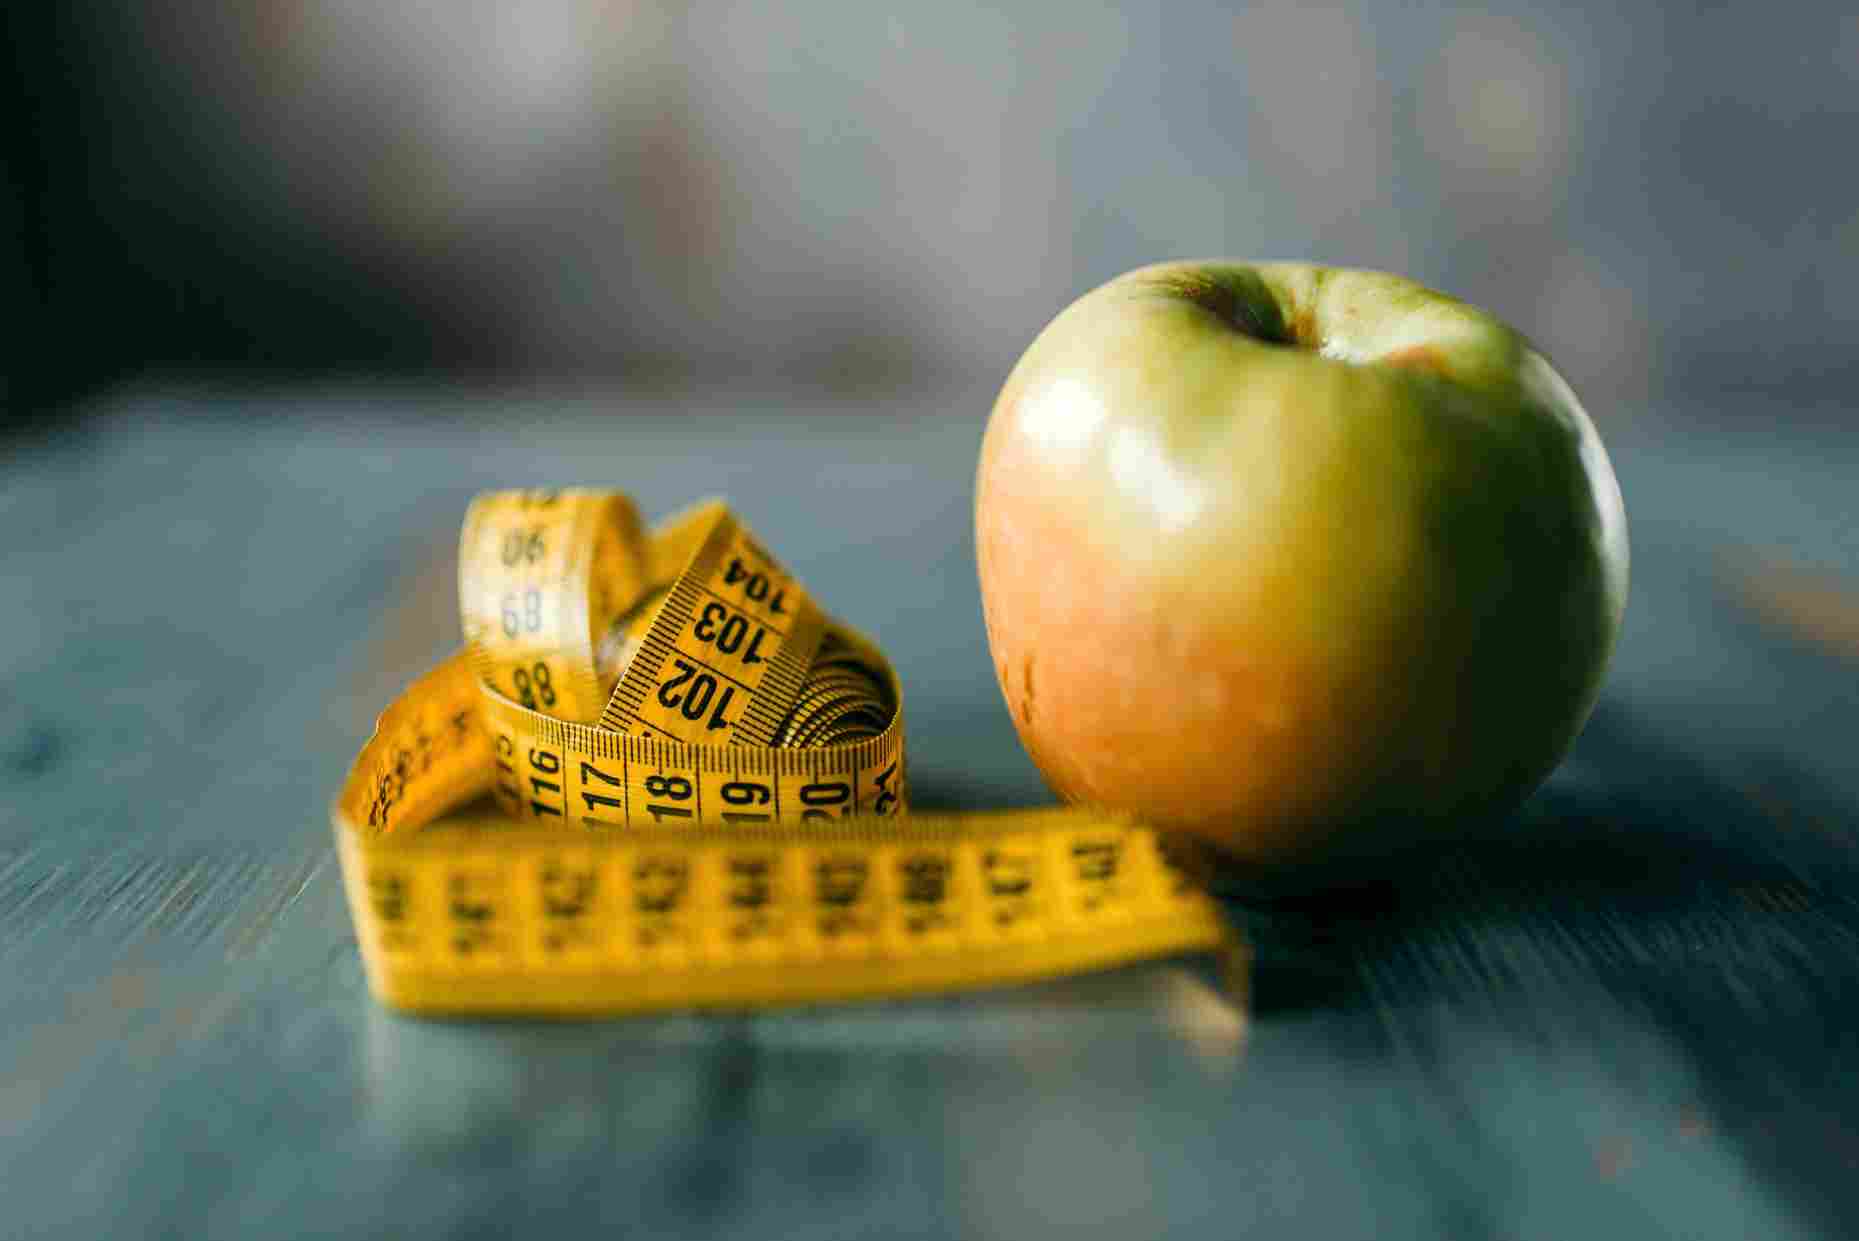 Apple cider vinegar (ACV) for weight loss: use, benefits, and precautions.